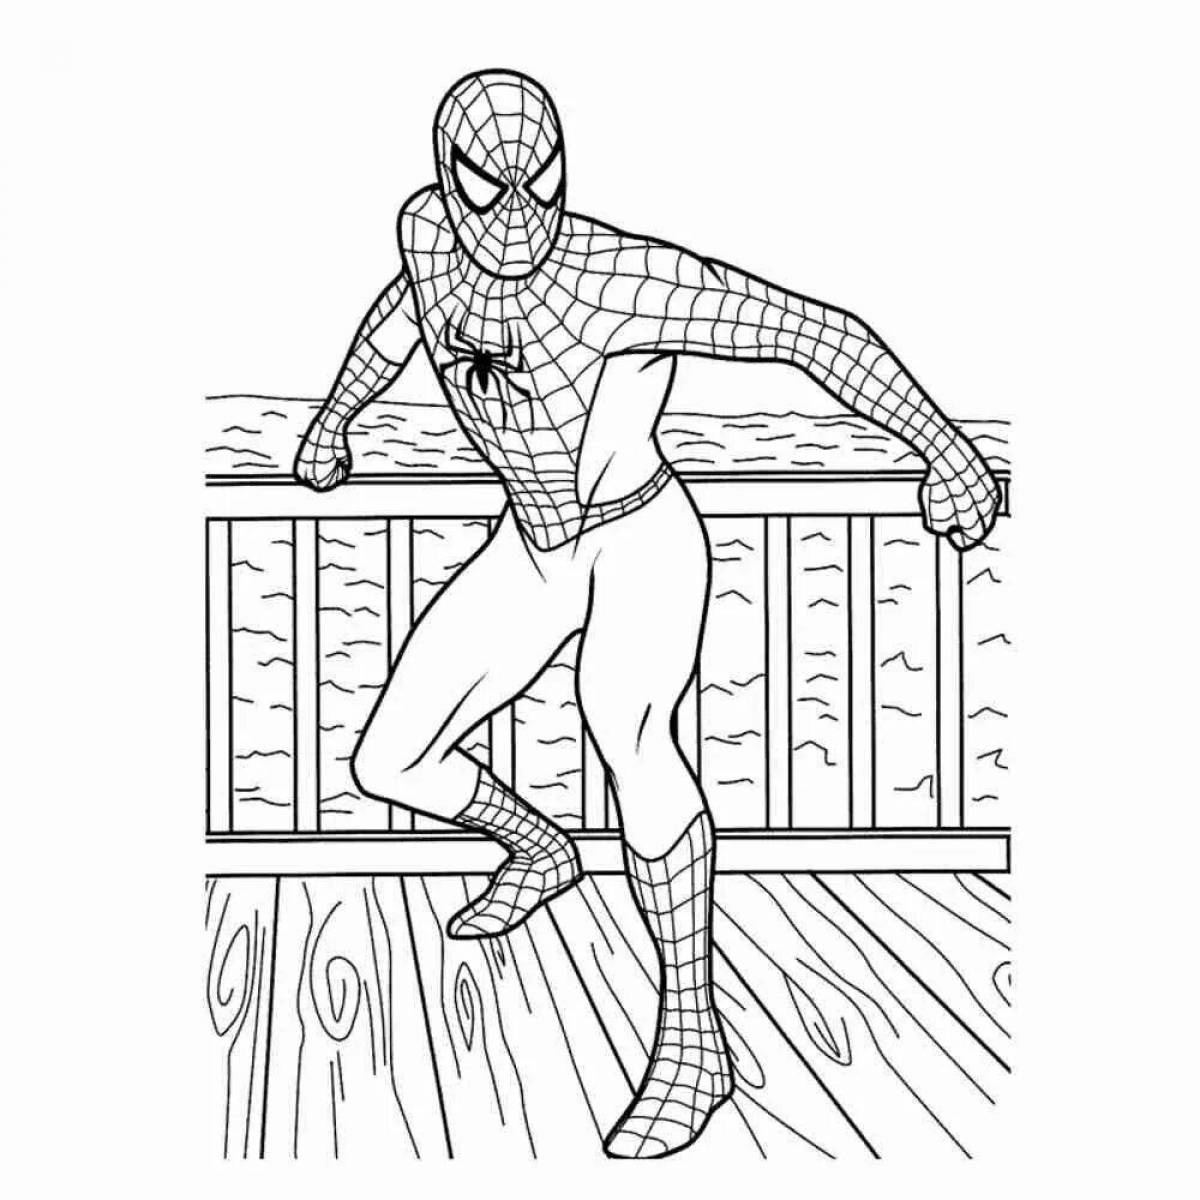 Spiderman's sparkling Christmas coloring book